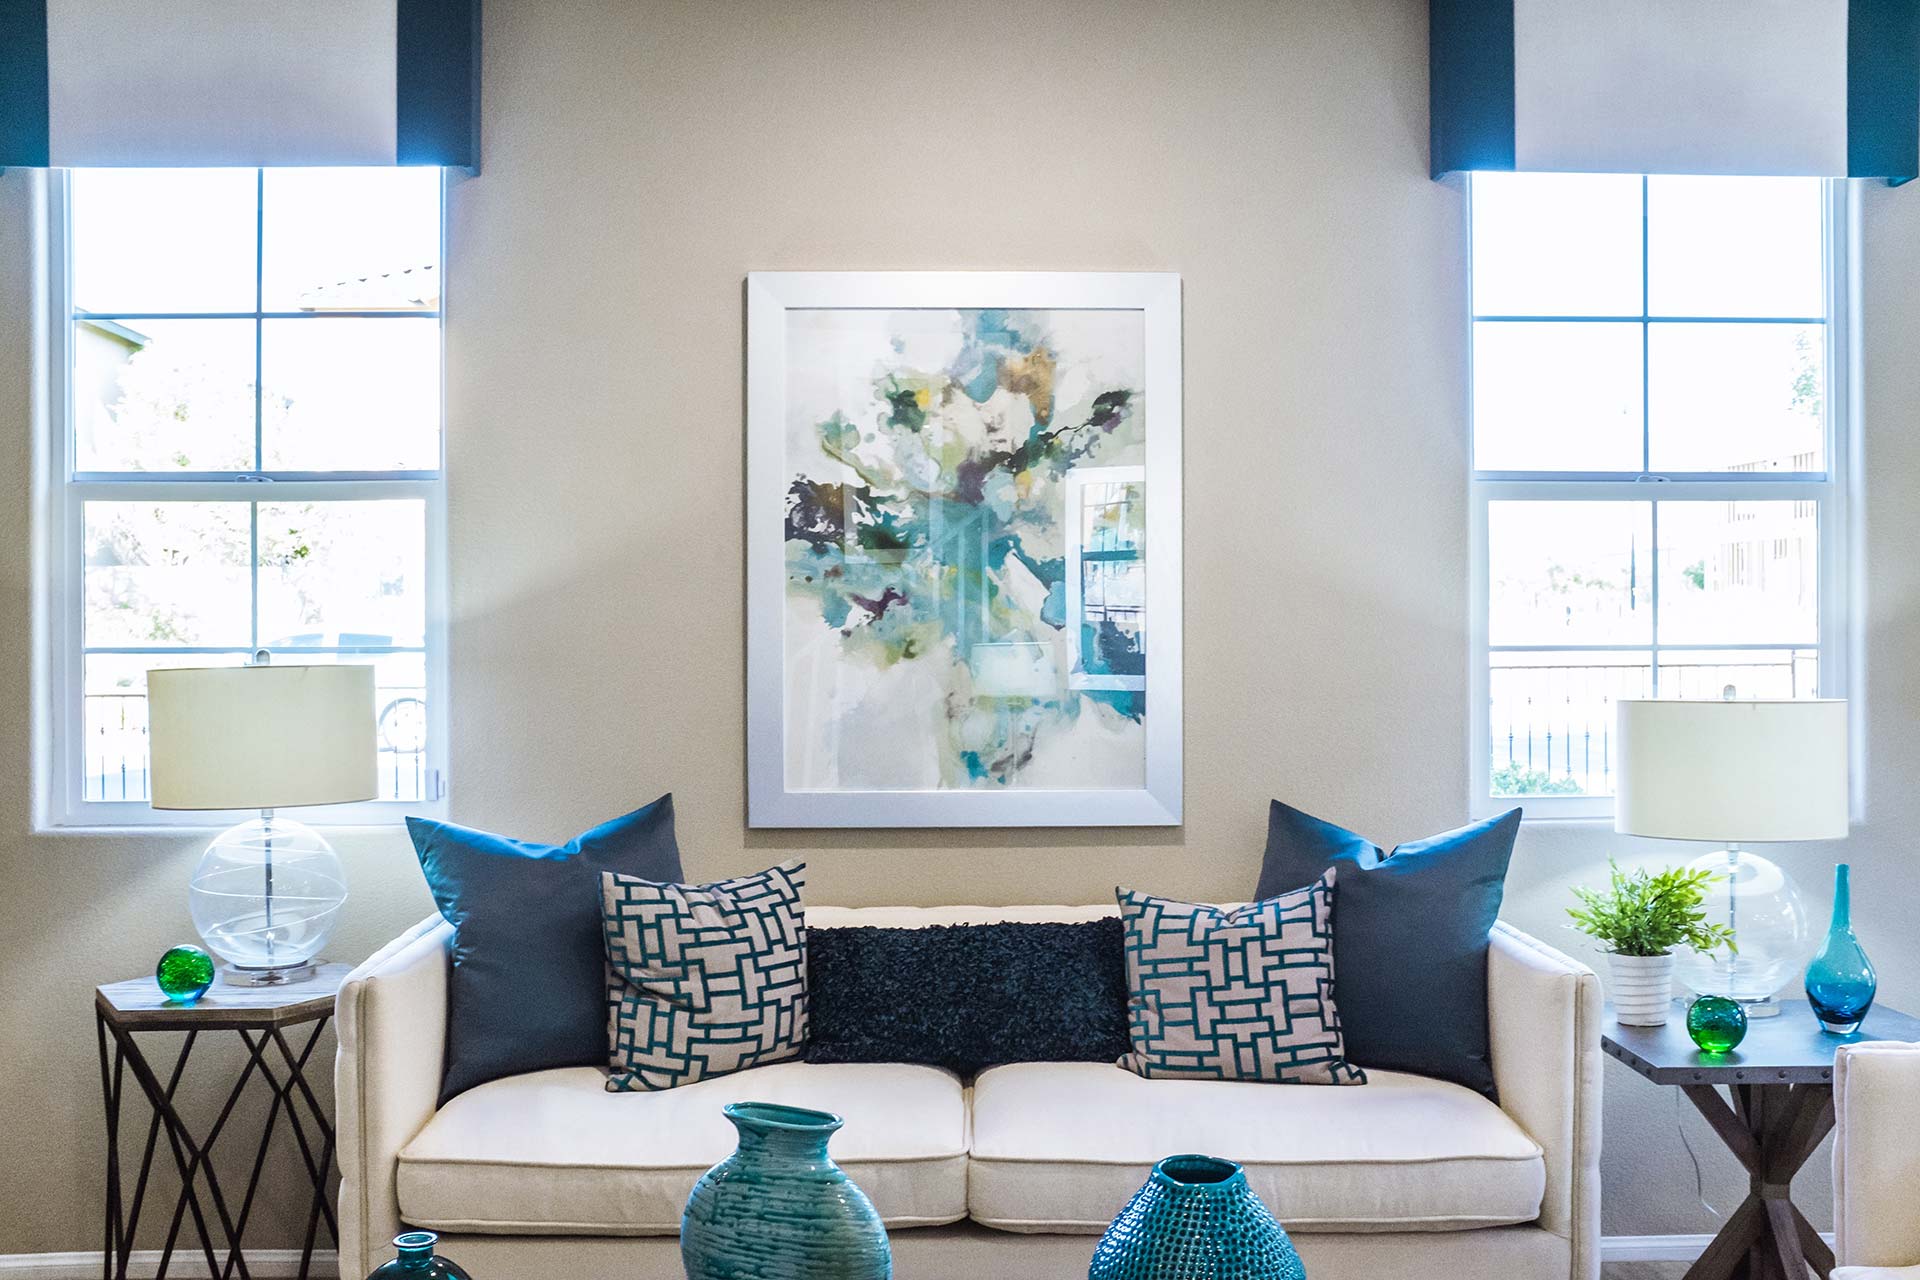 a custom designed living room with a blue and white theme including throw pillows, blinds, and table decorations